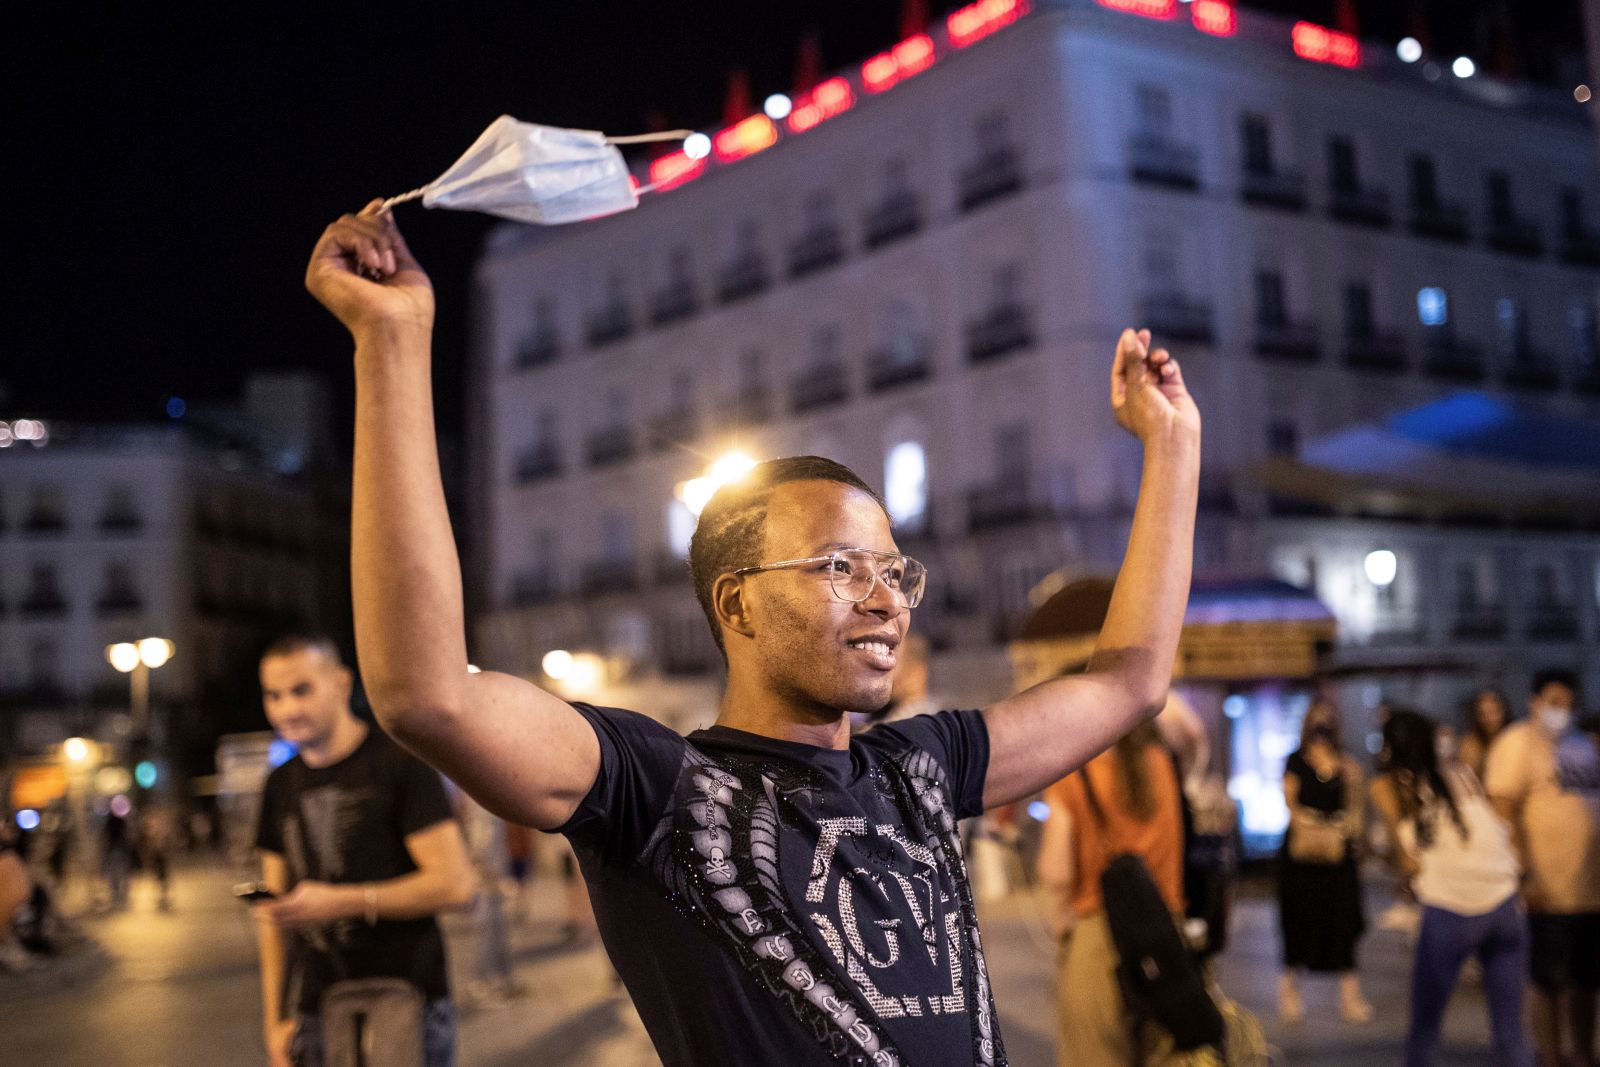 epa09302178 A young man celebrates the end of the mandatory use of facial masks outdoors in Puerta del Sol square in Madrid, Spain, early 26 June 2021. People are allowed to go without facial masks outdoors as long as social distancing is possible.  EPA/RODRIGO JIMENEZ